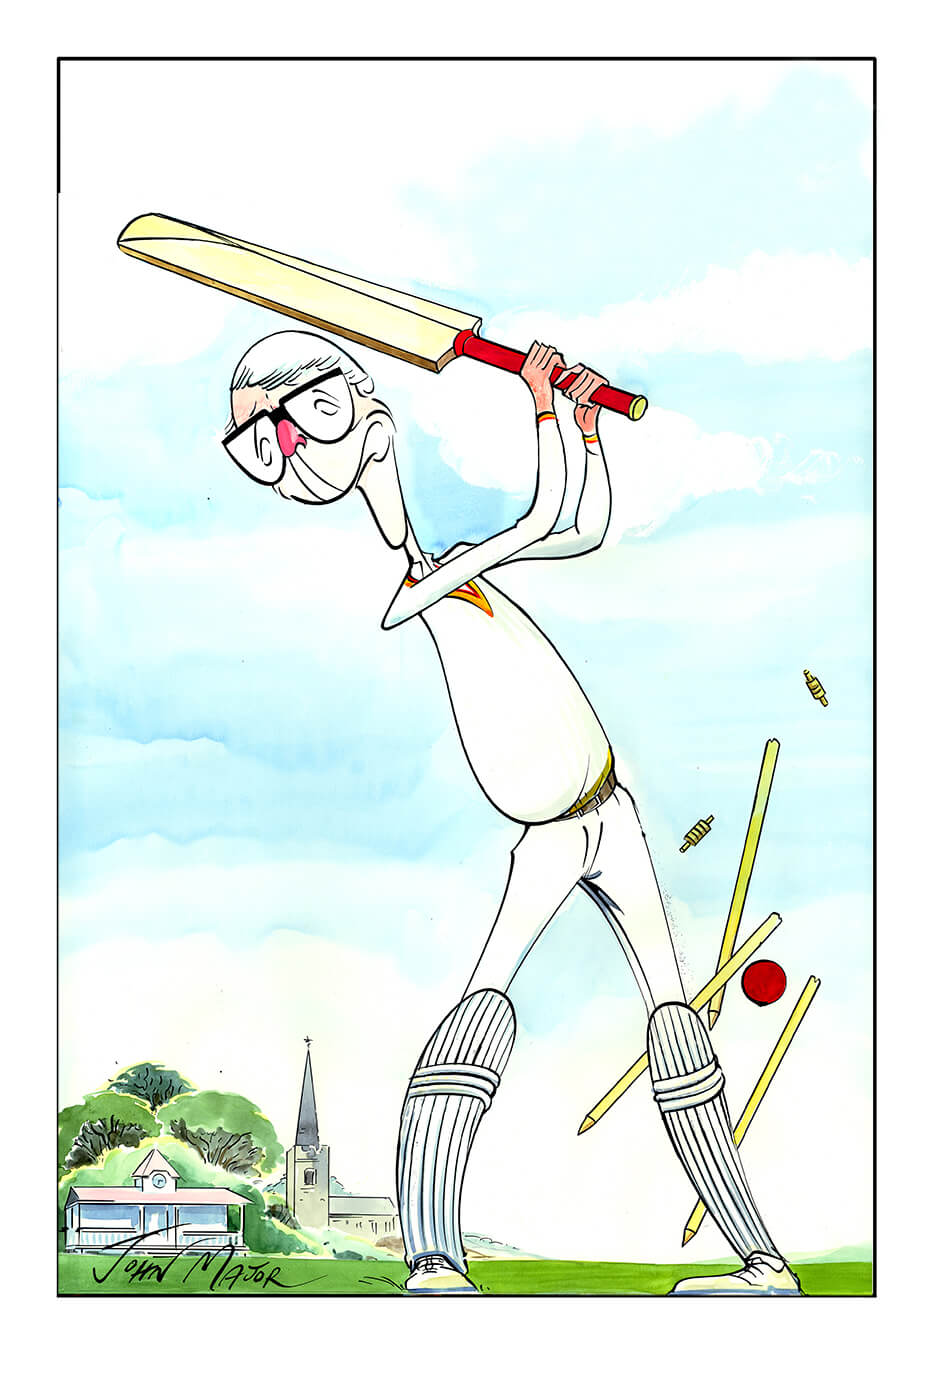 Gerald Scarfe's cartoon of John Major, showing the Prime Minister playing cricket on an English village green and being clean bowled.